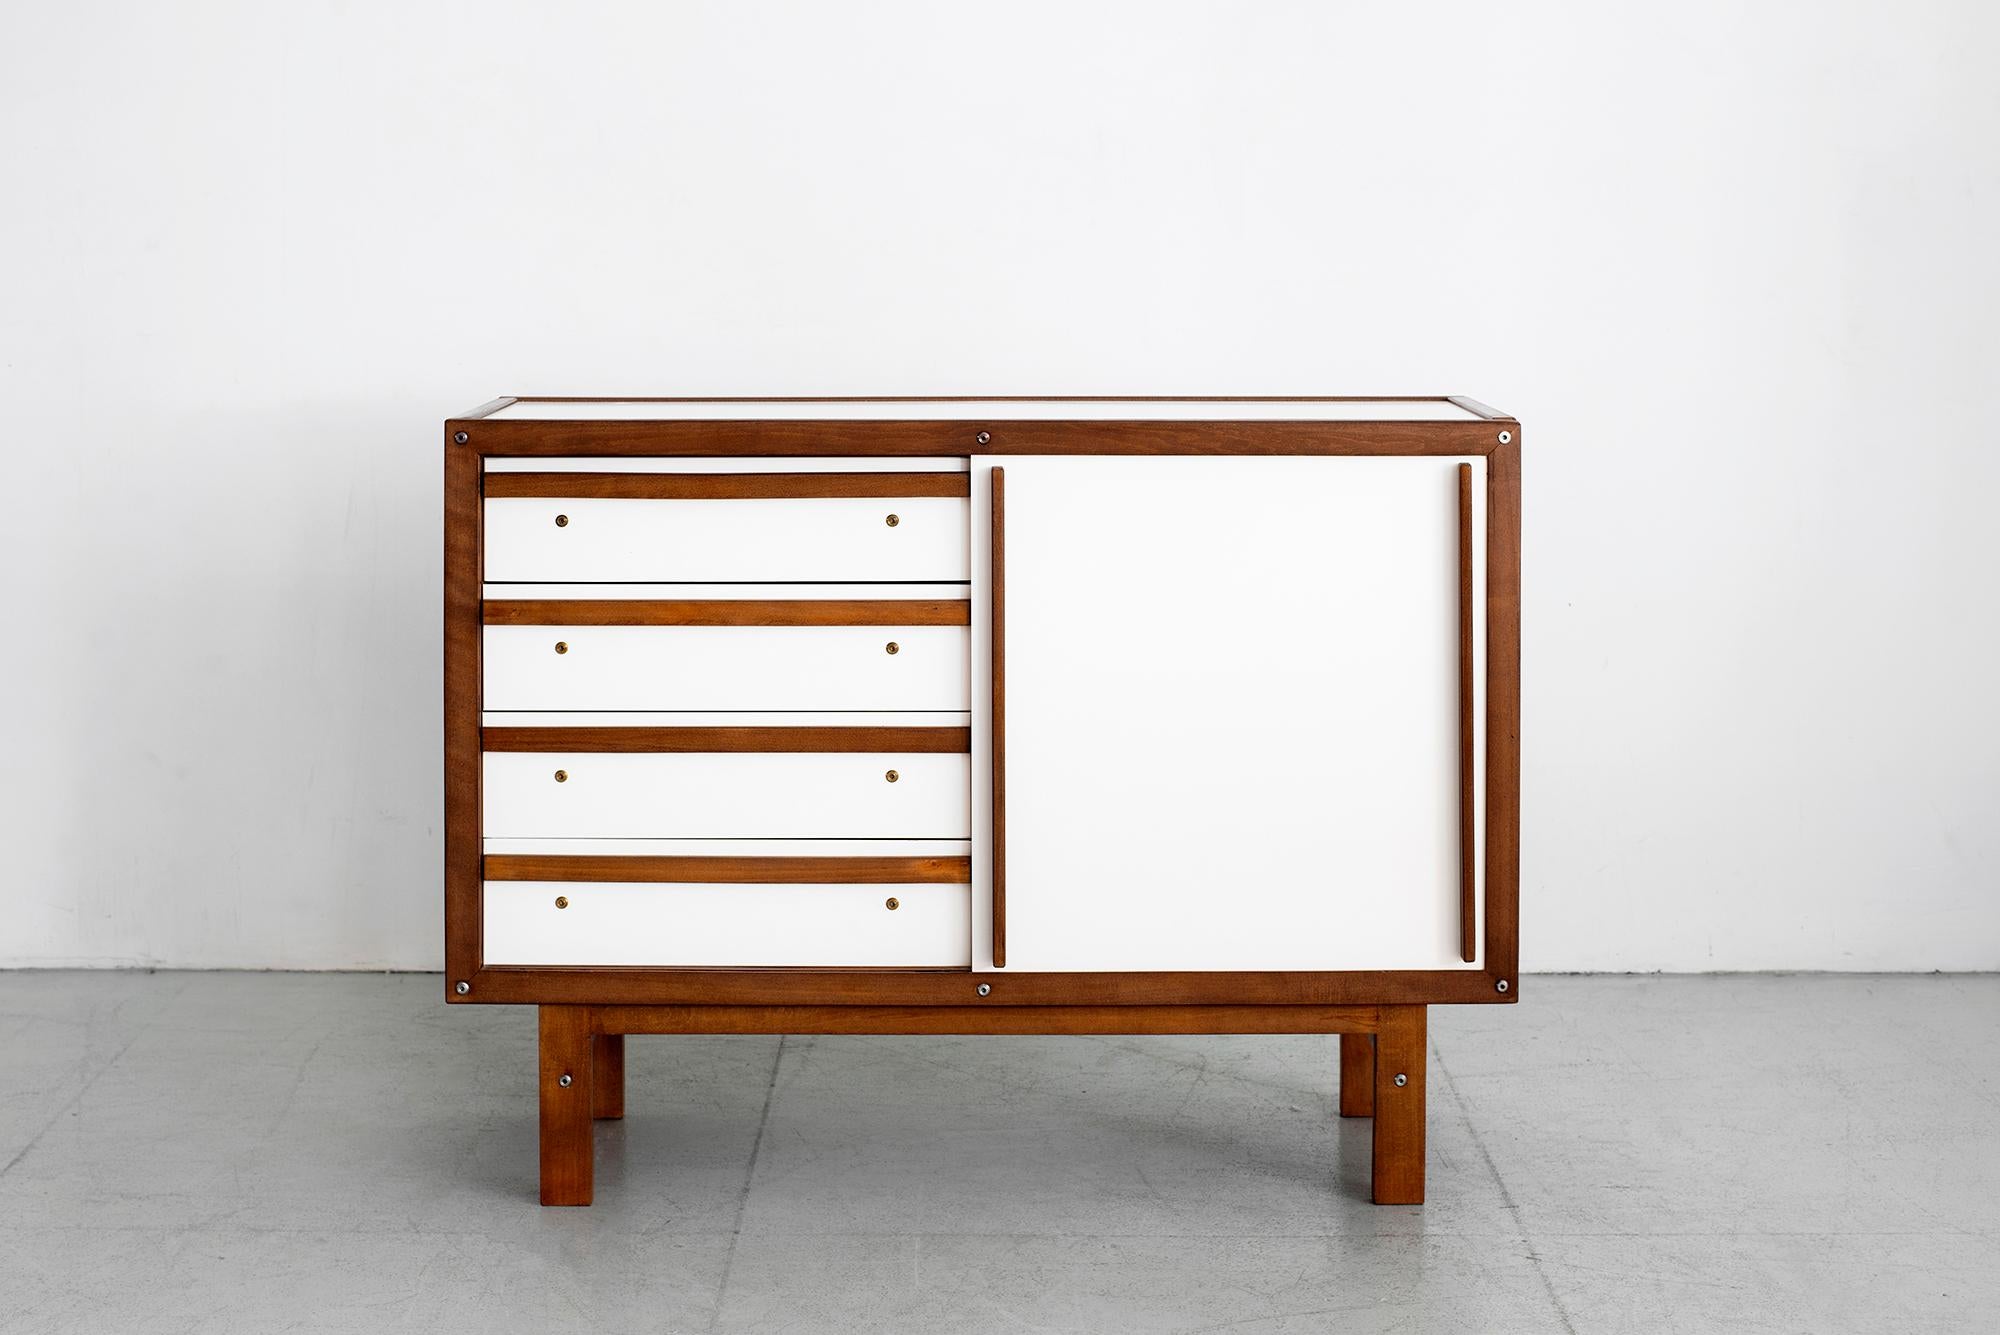 Rare dresser cabinet by French cabinetmaker Andre Sornay with white sliding door. 
Cabinet has white drawers, side and top with French Oak trim and handles. 
Sliding door revealing drawers on one side and open shelving on the other.